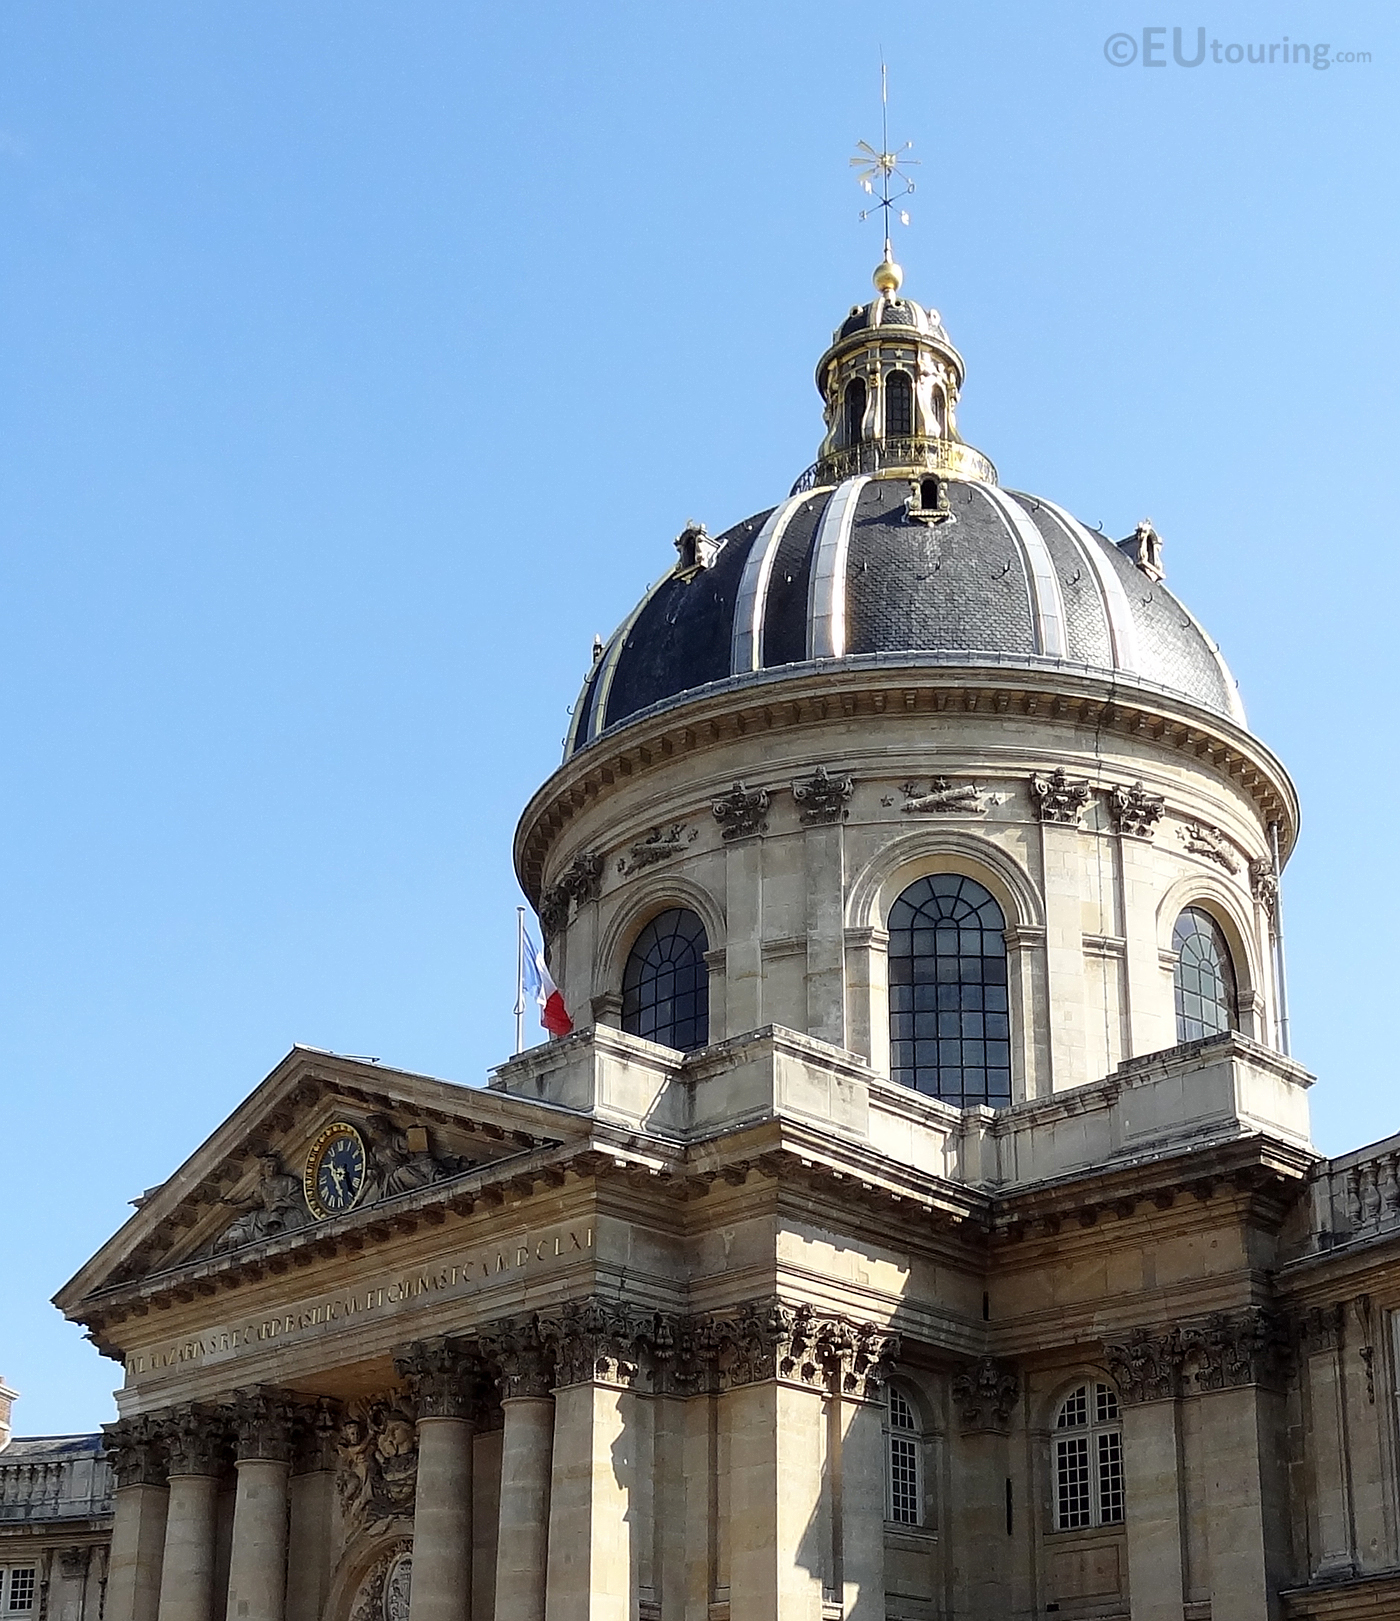 Dome and architecture of Institut de France